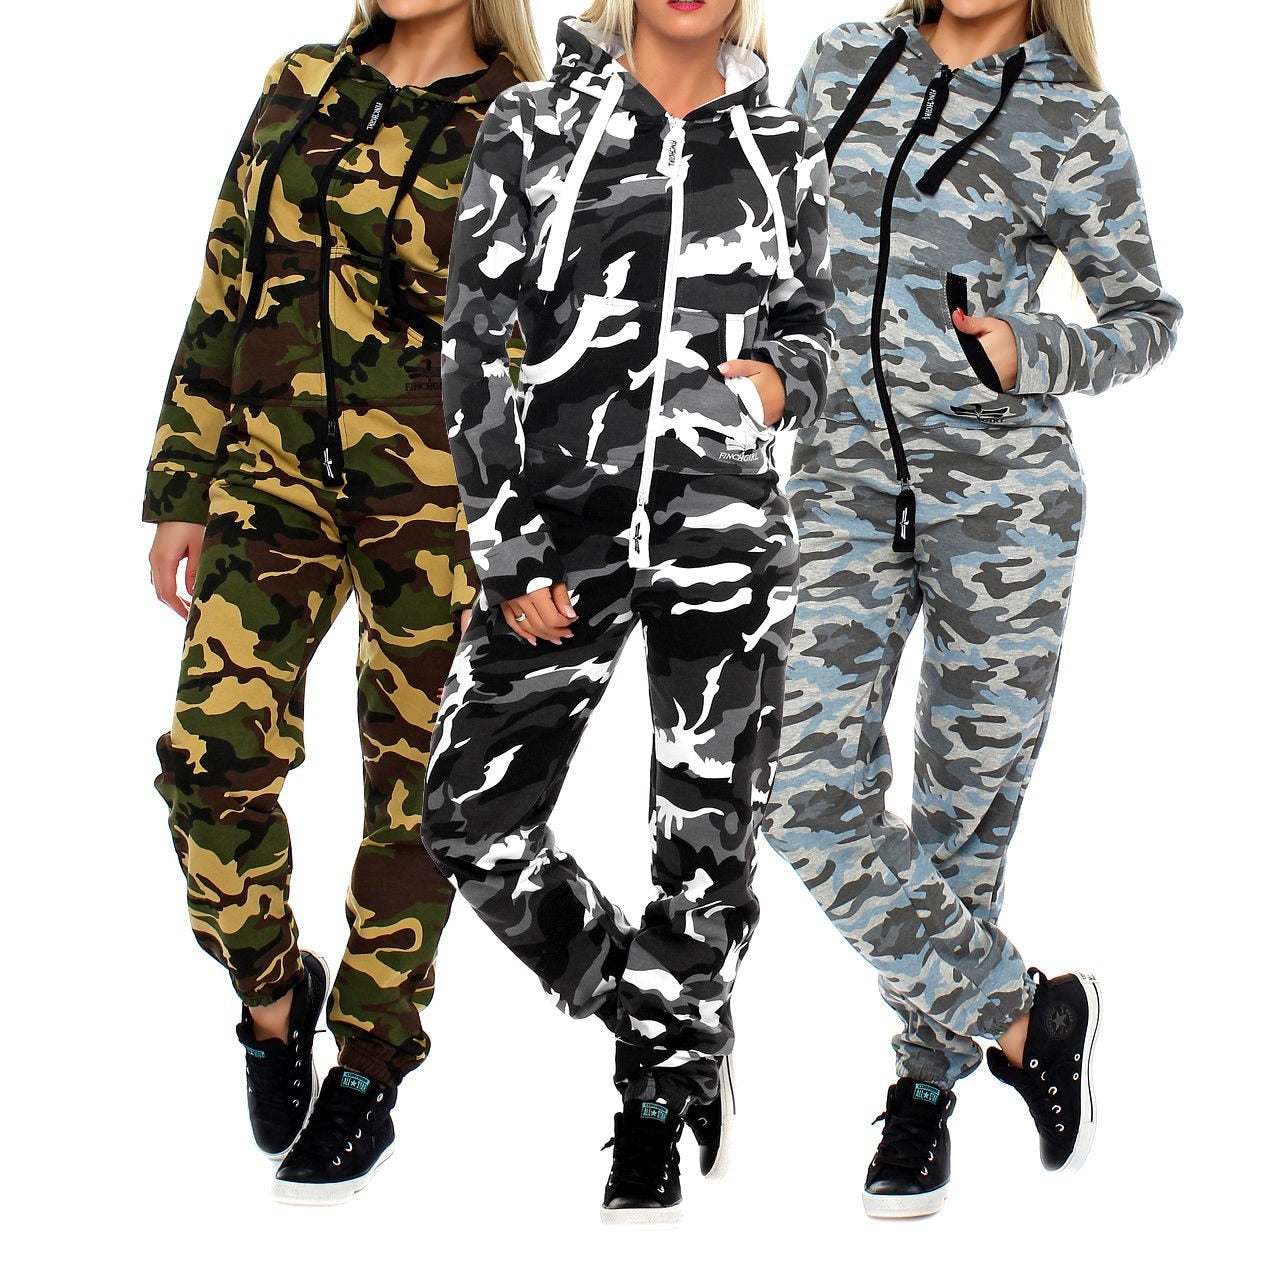 Piece Set Fashion Camouflage Autumn Tracksuit TopsWomen's Two Piece Set Fashion Camouflage Autumn Tracksuit Tops and Pan